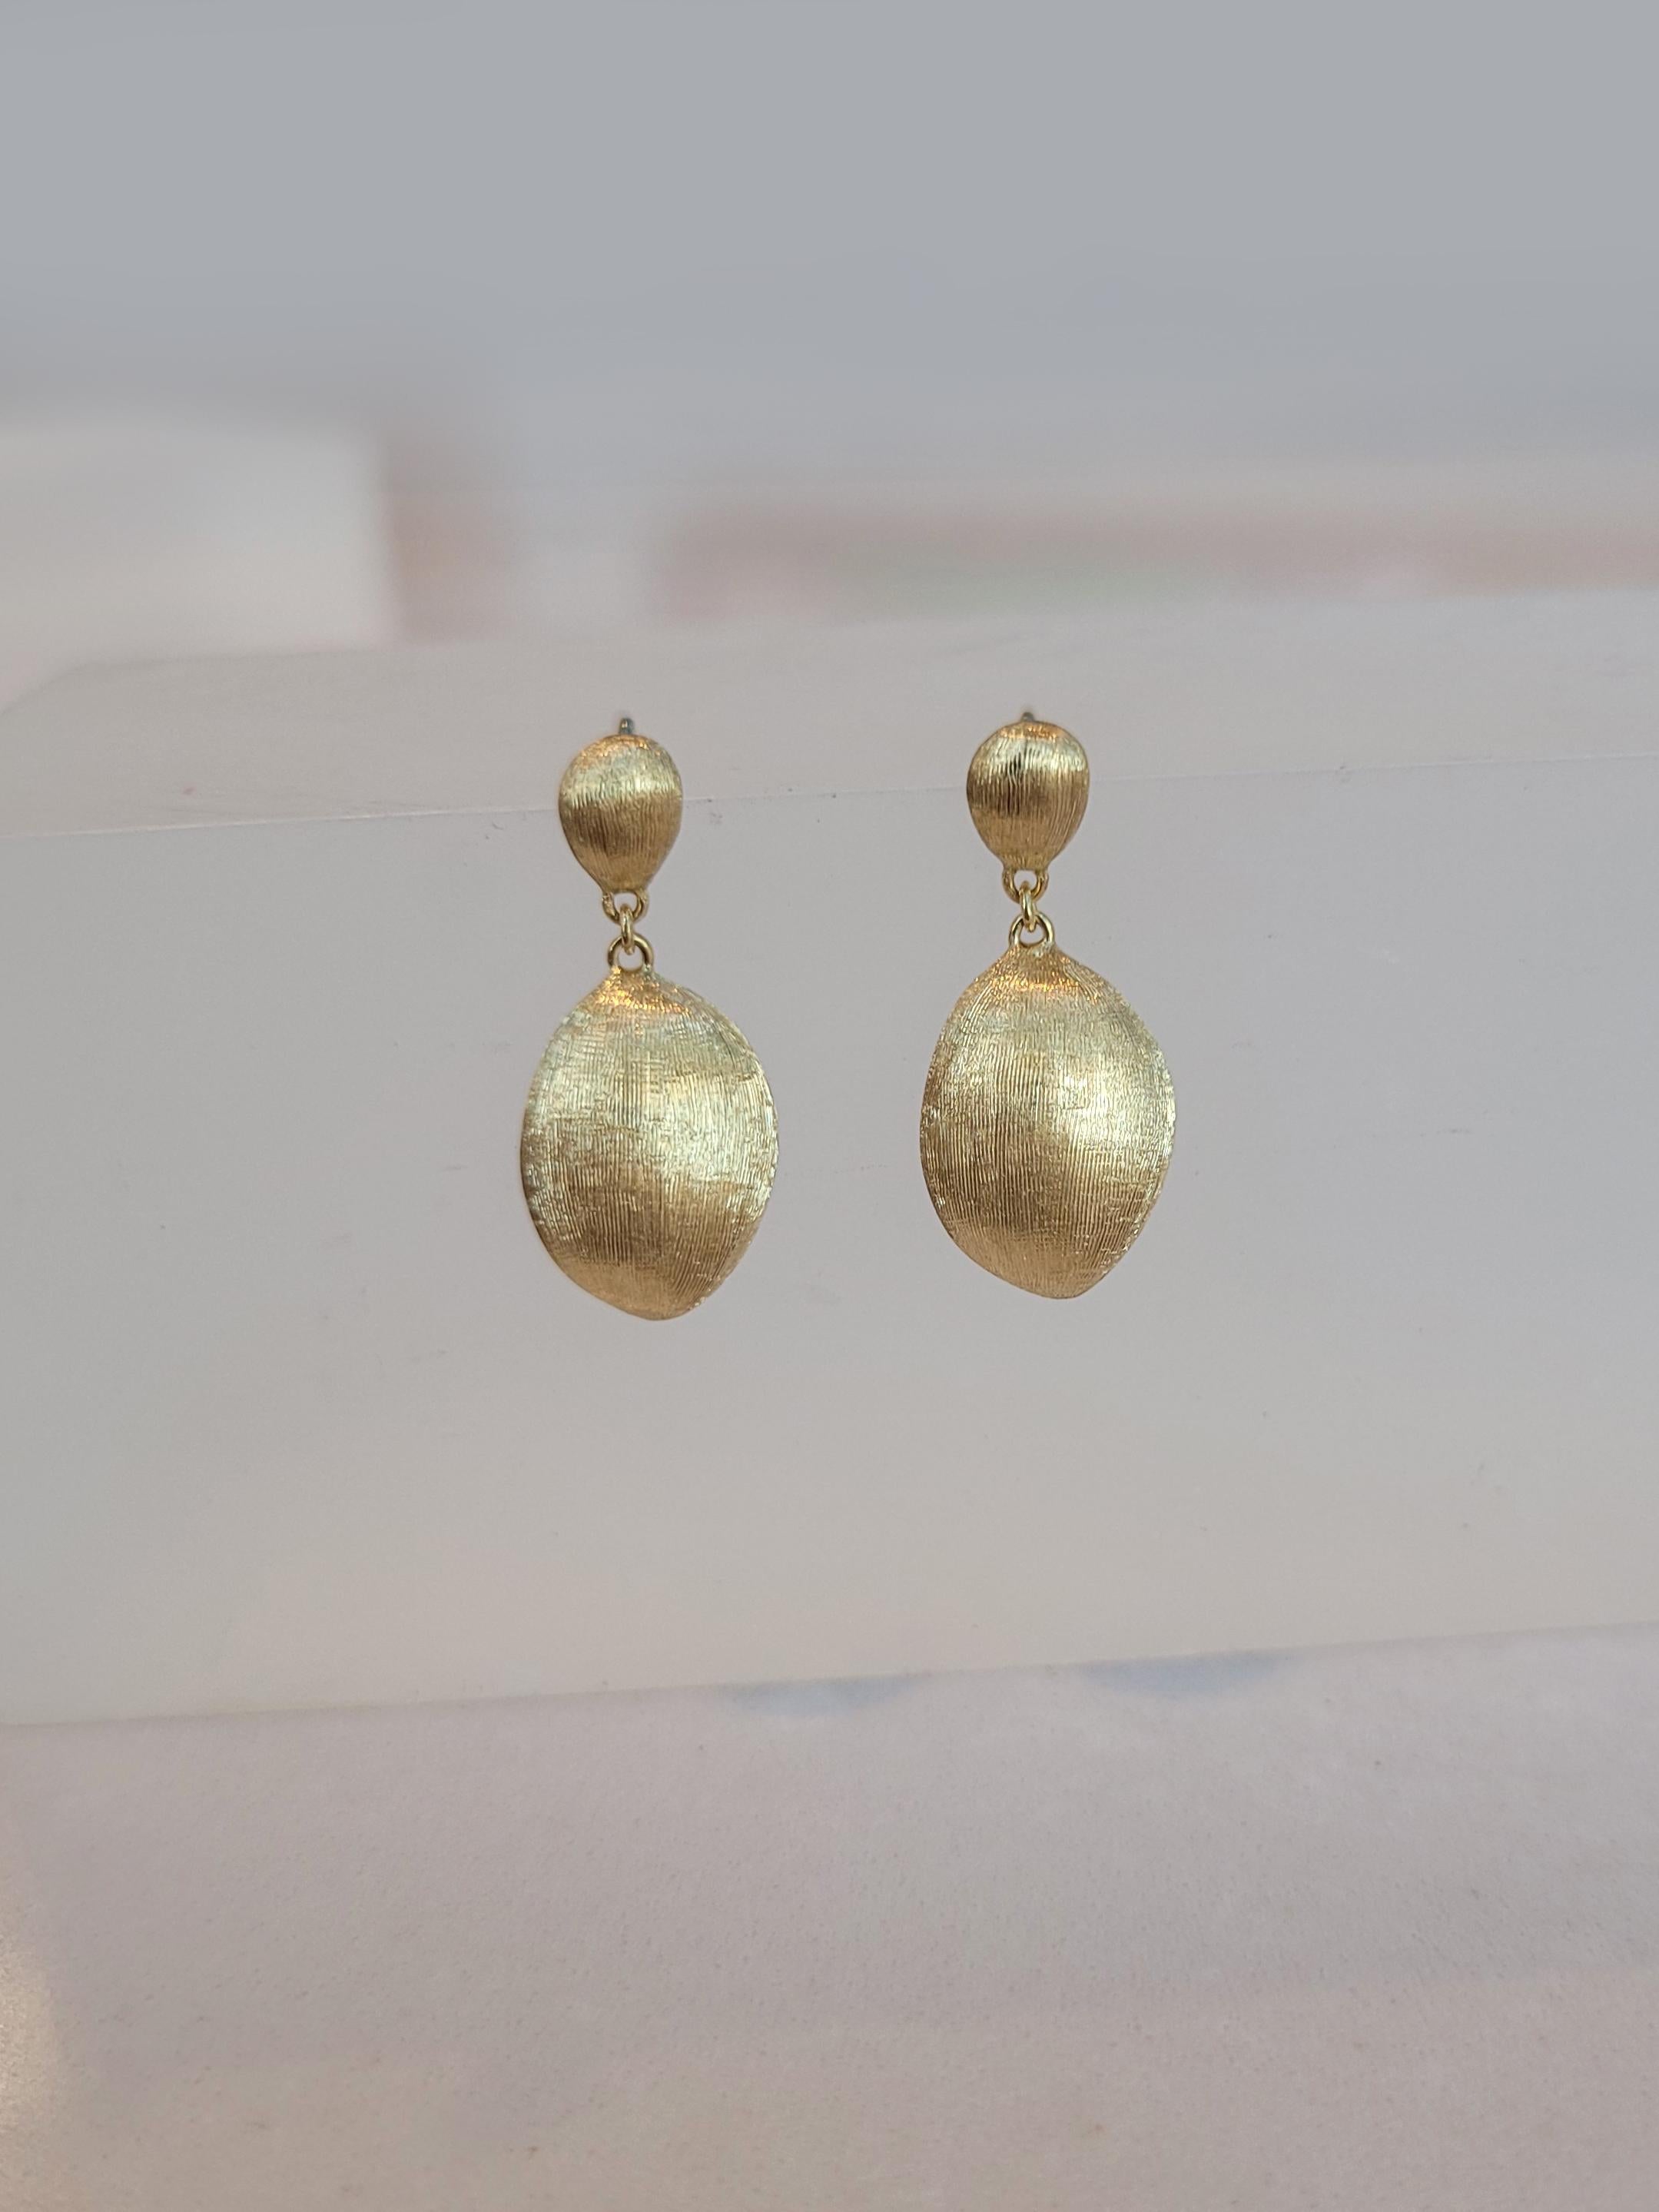 18K yellow gold earrings featuring Marco Bicego's signature hand-engraved finished. Posts and friction back closures.